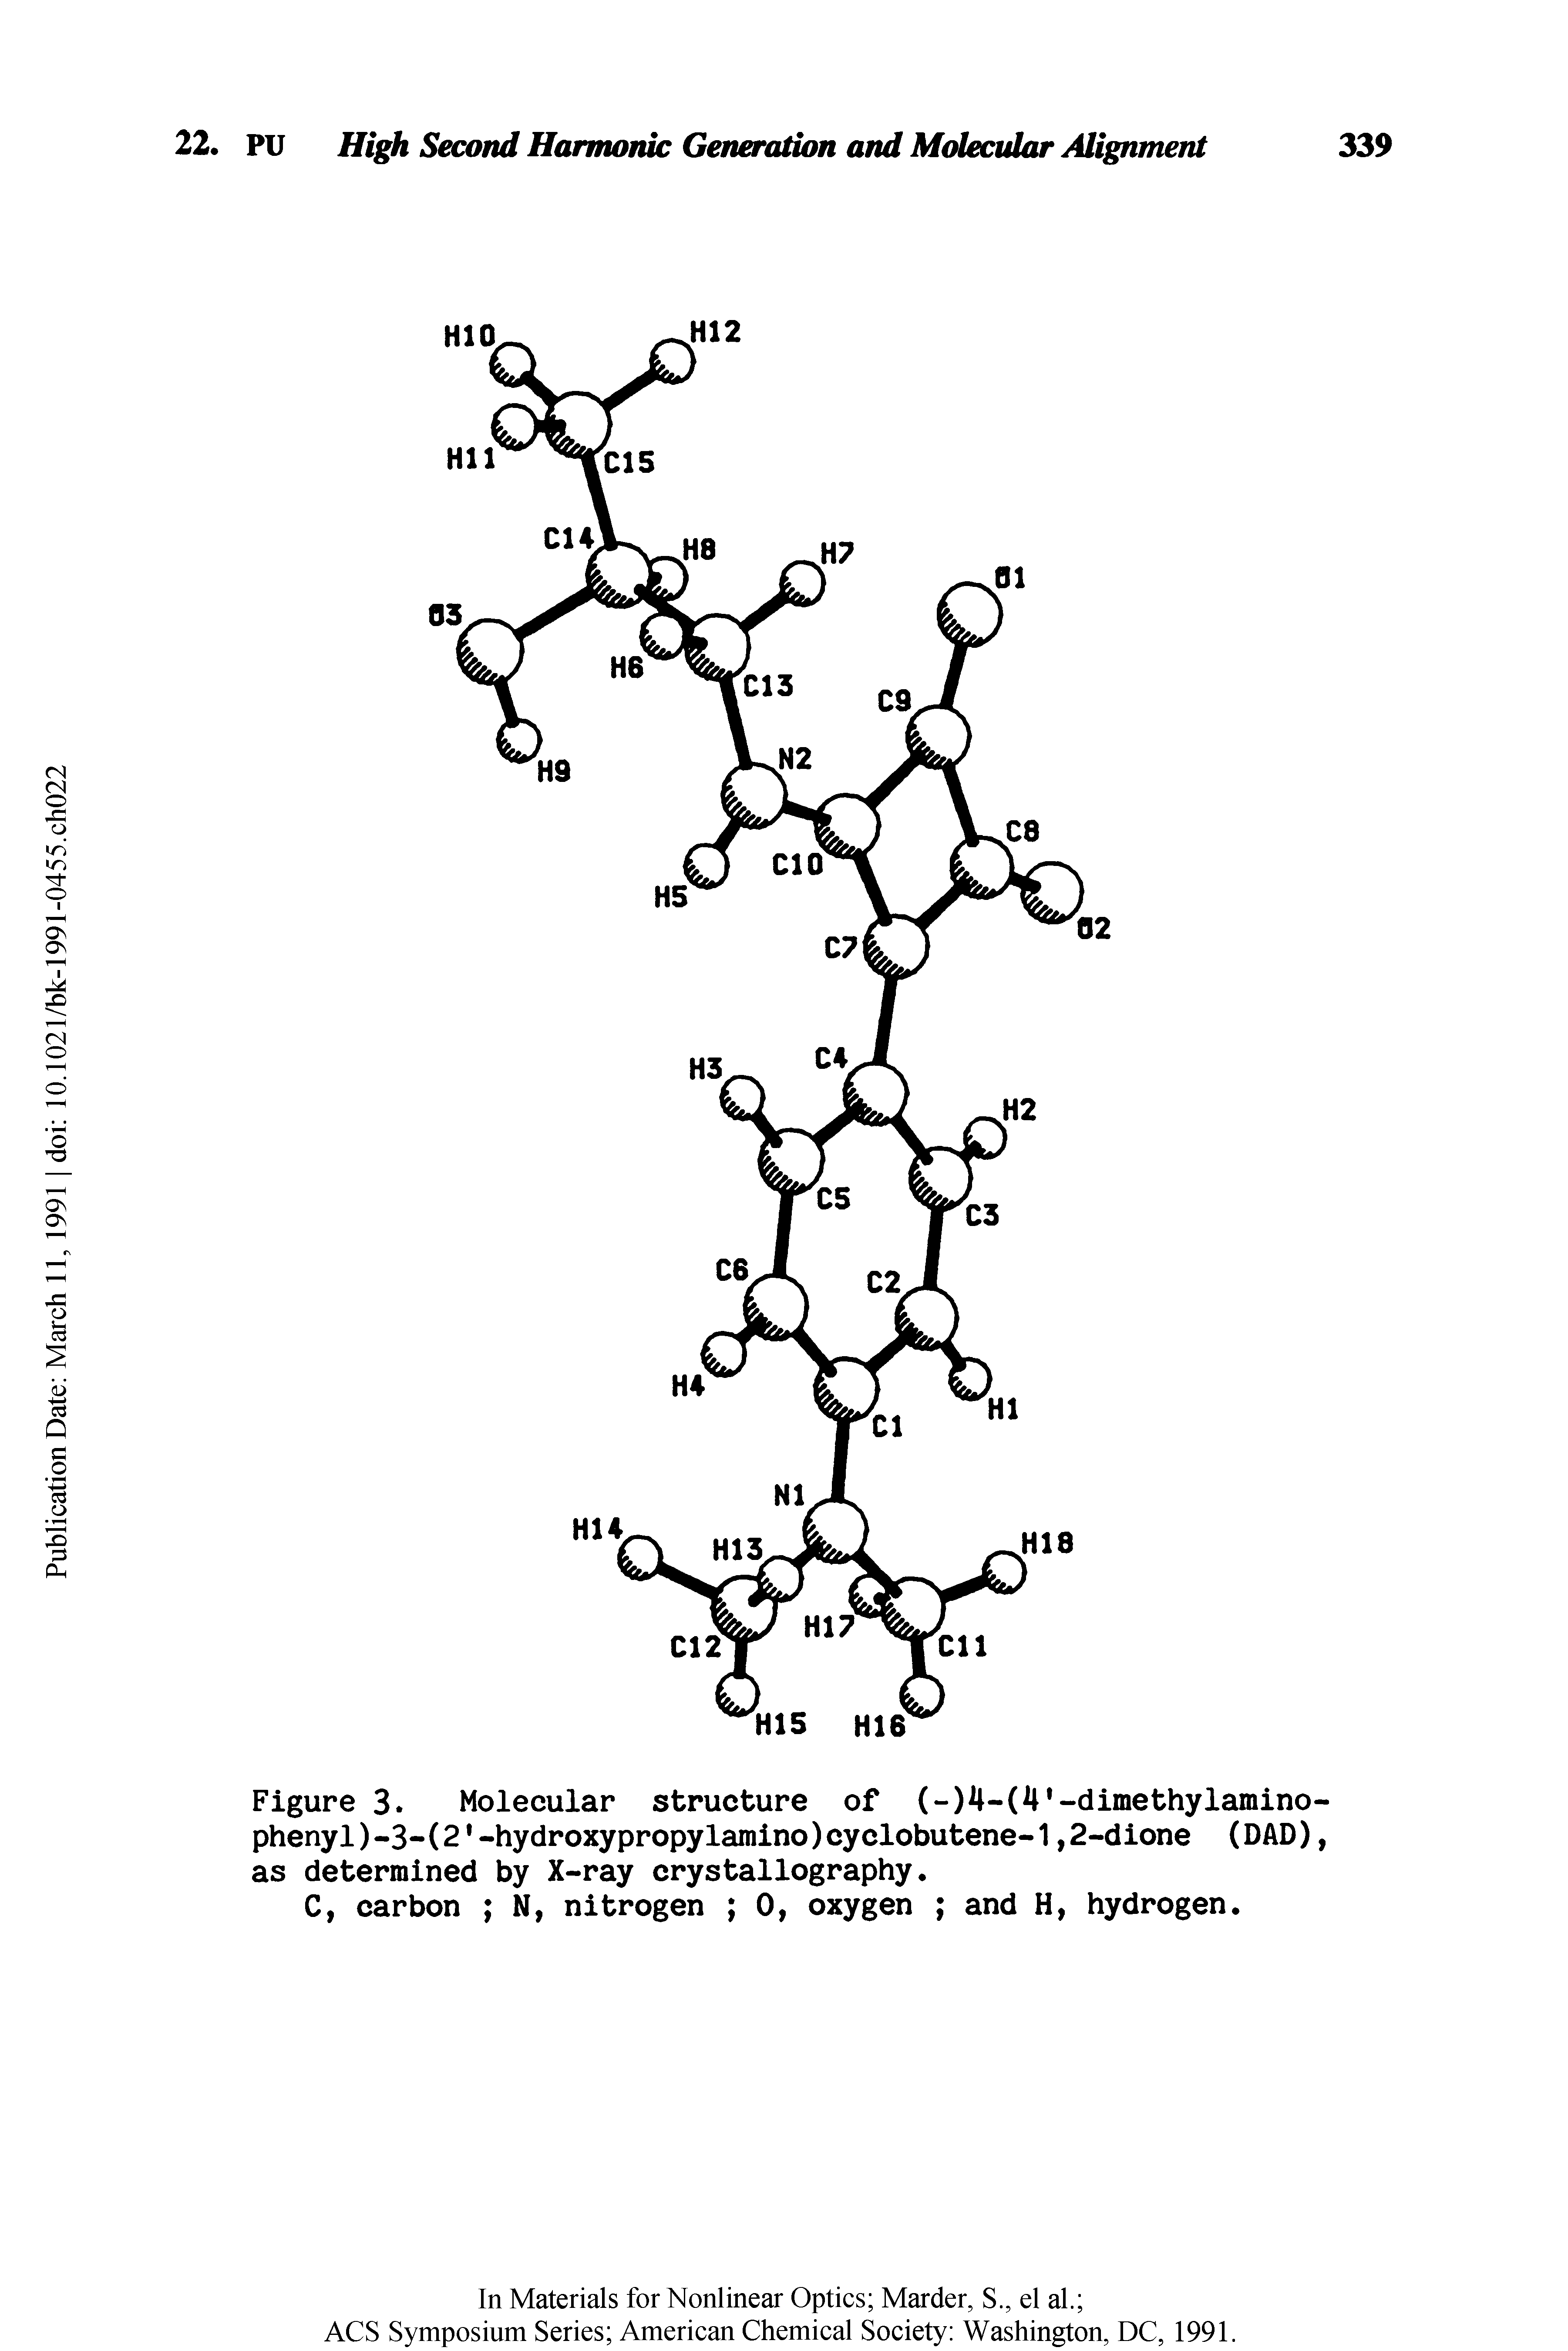 Figure 3. Molecular structure of (-)4-(4,-dimethylamino-phenyl)-3-(21-hydroxypropylamino)cyclobutene-1,2-dione (DAD), as determined by X-ray crystallography.